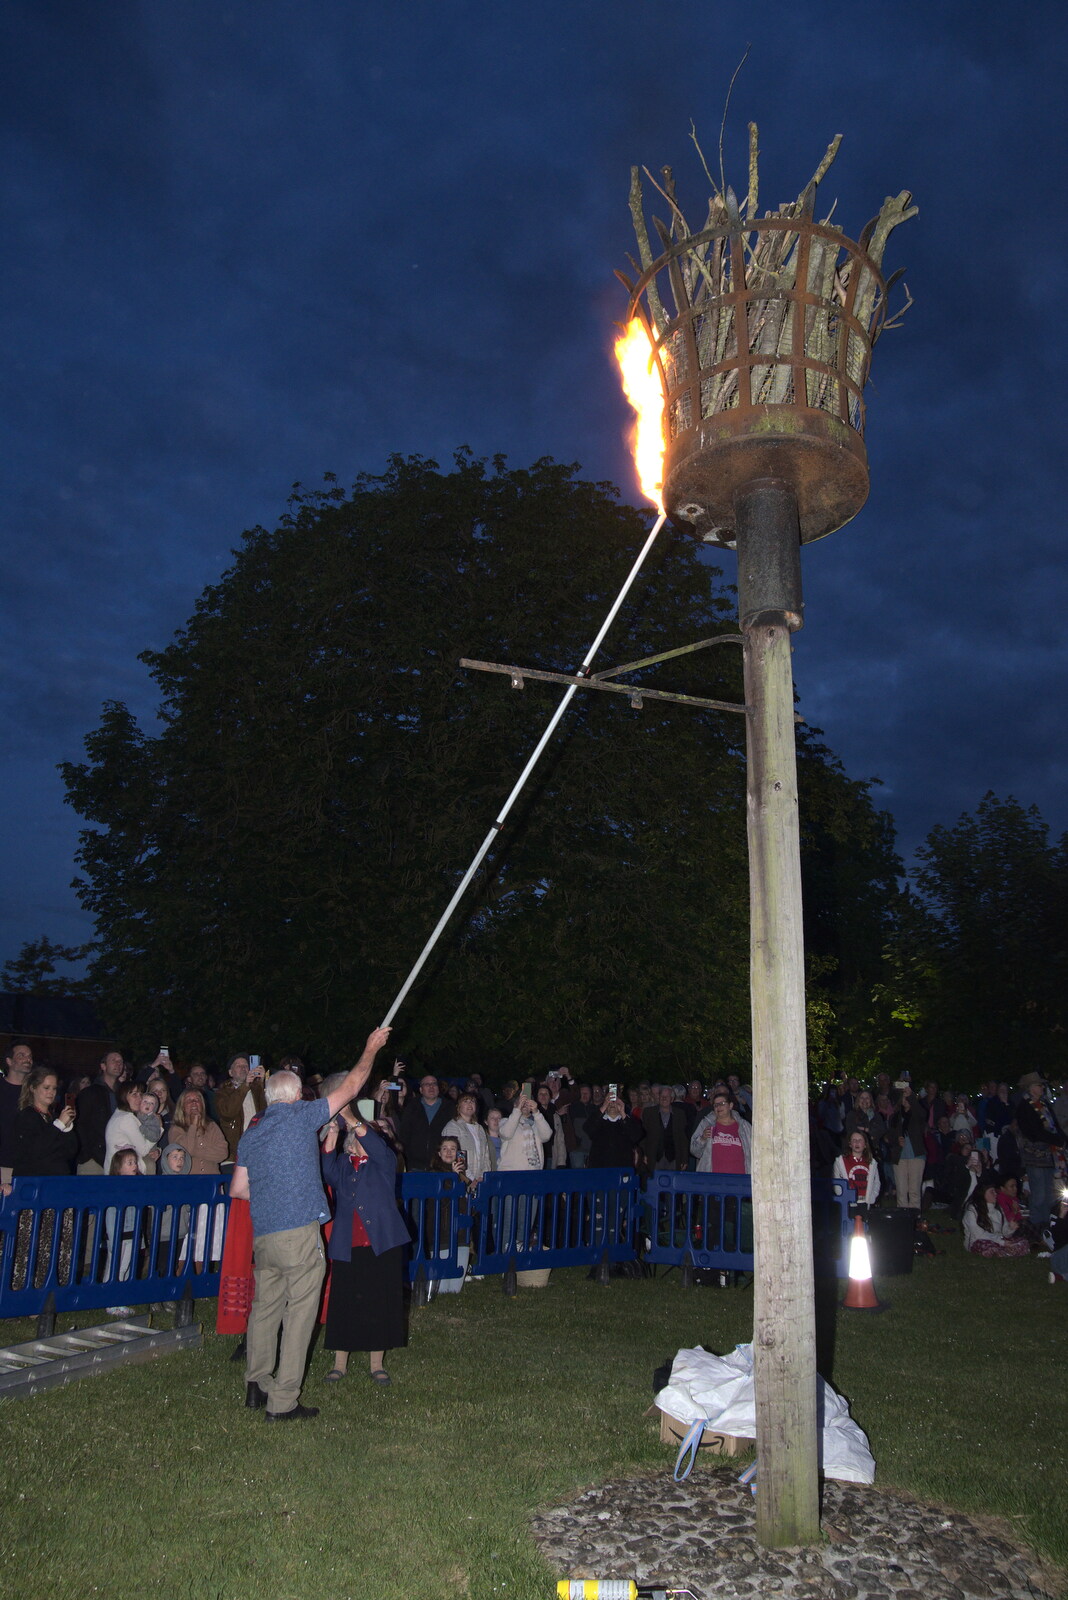 Eye's oldest resident helps to light the beacon from The Lighting of the Jubilee Beacon, Eye, Suffolk - 2nd June 2022